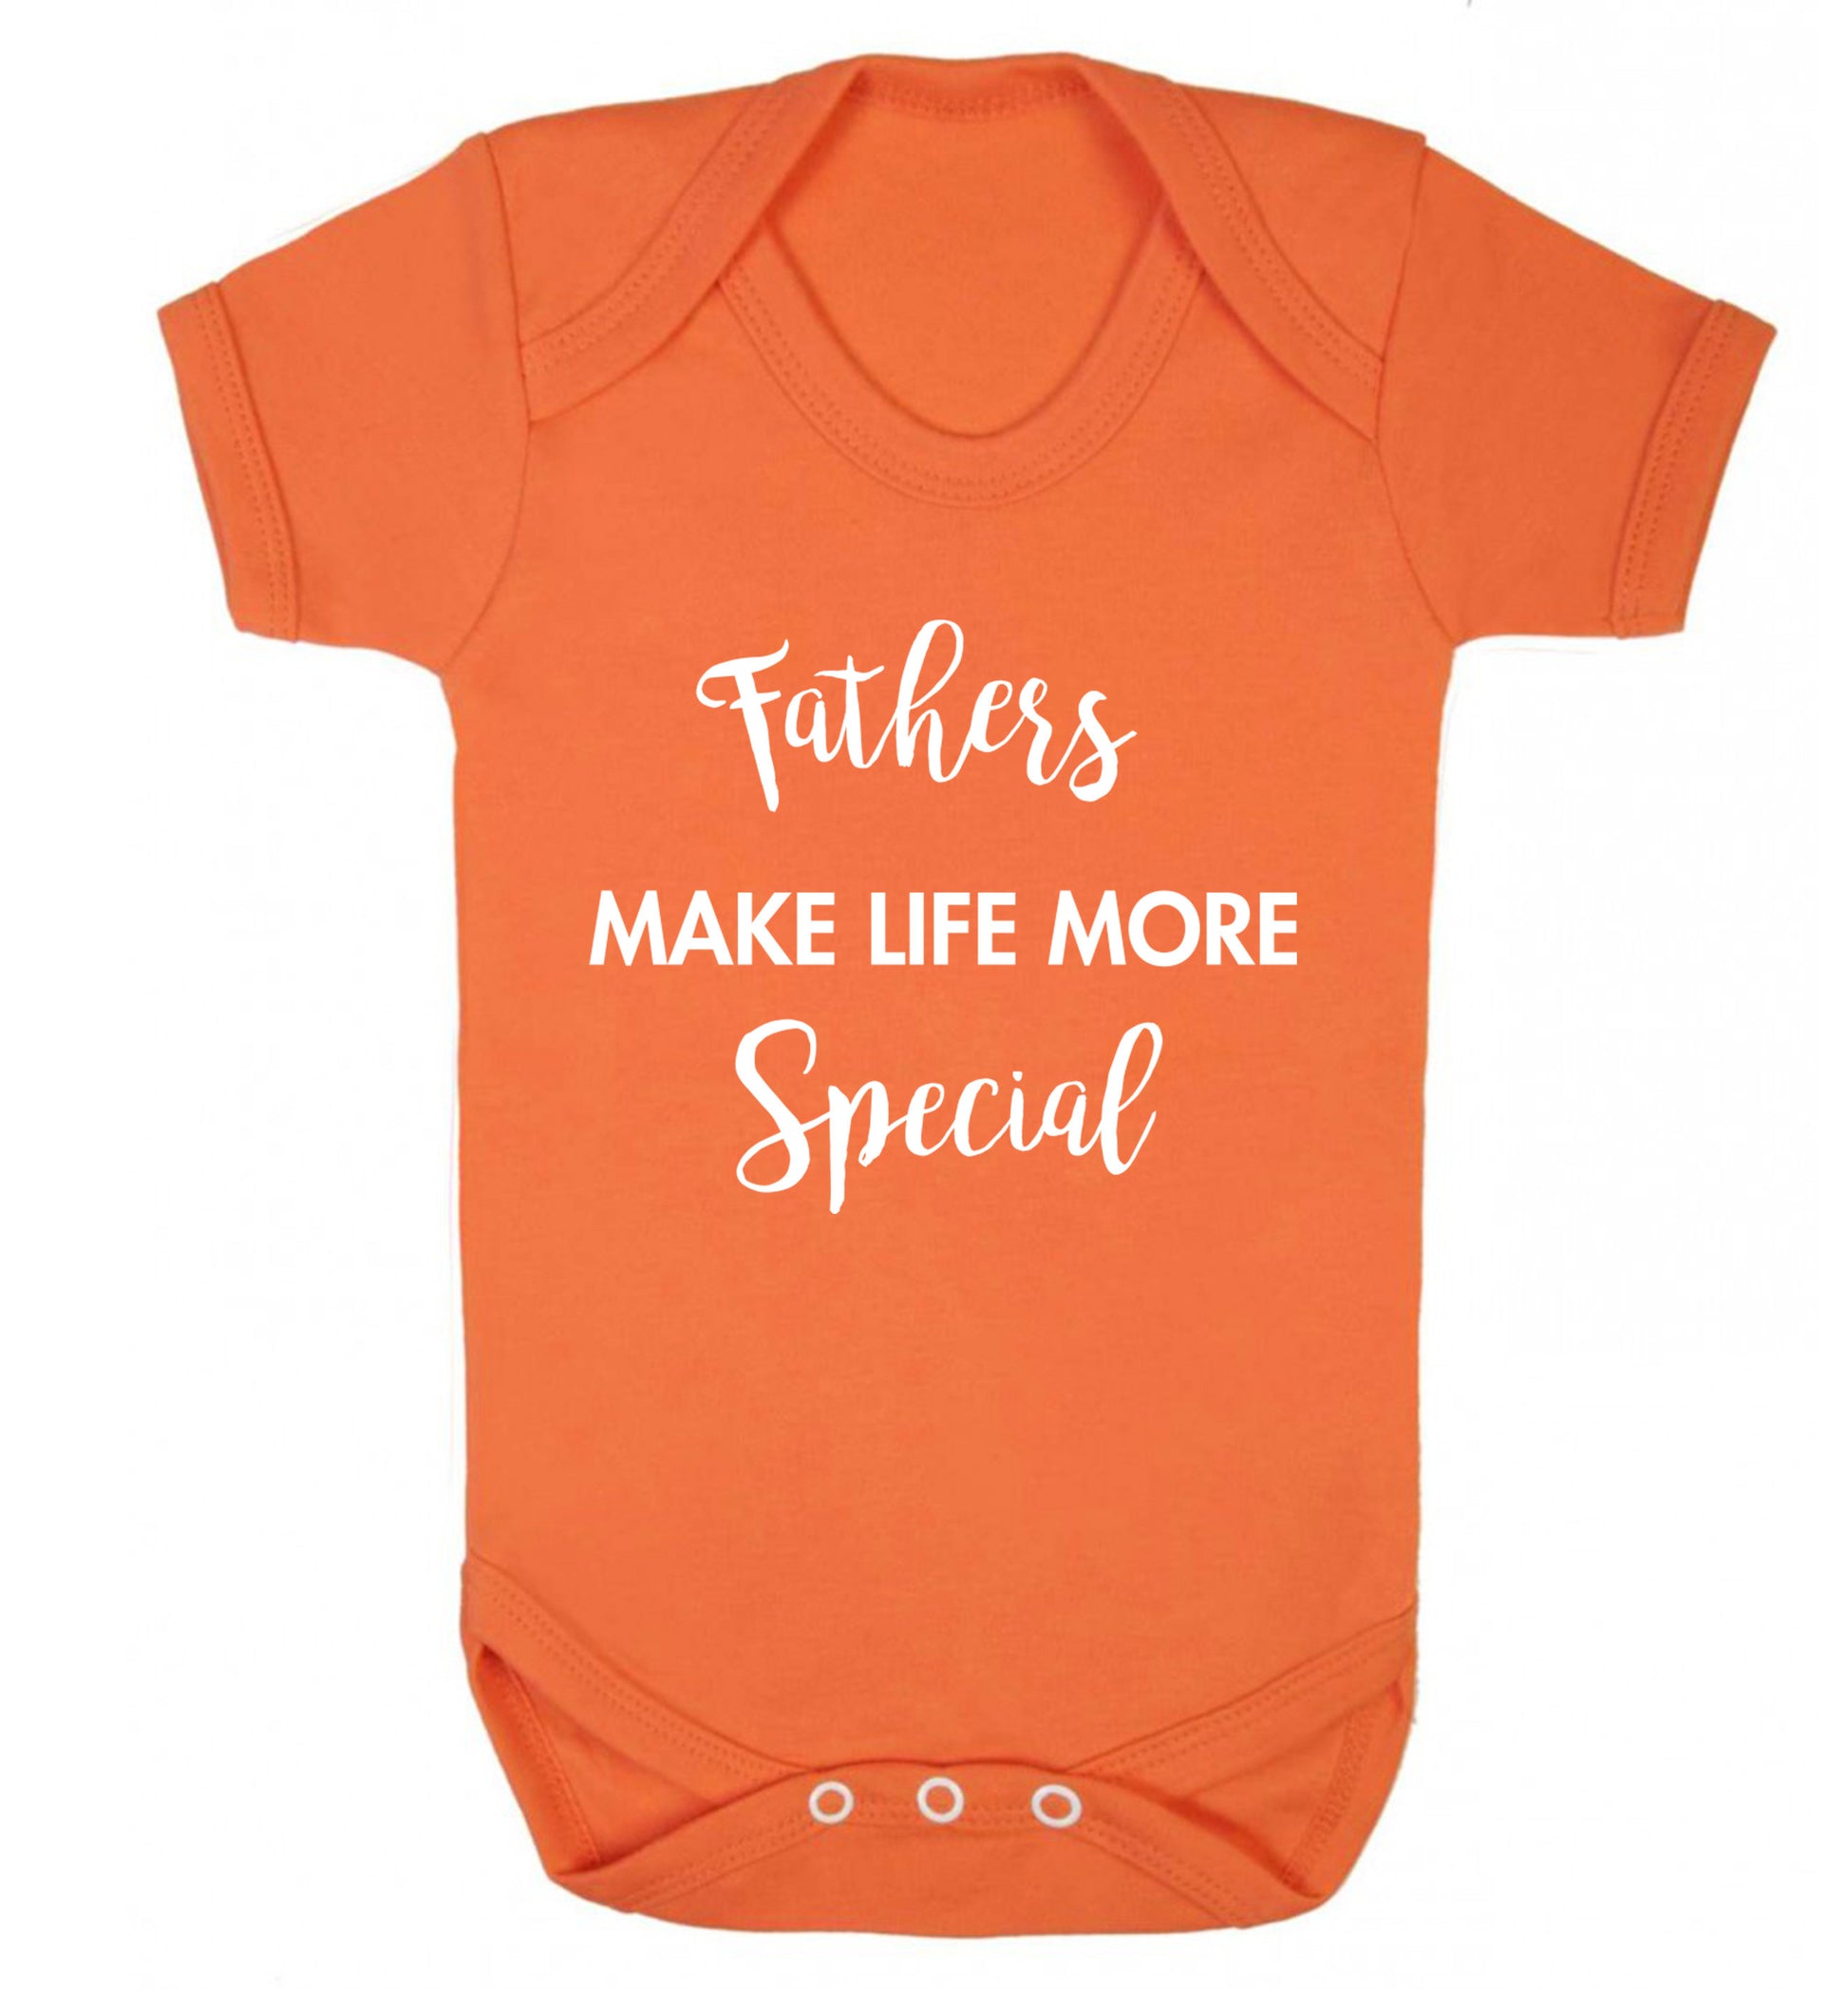 Fathers make life more special Baby Vest orange 18-24 months